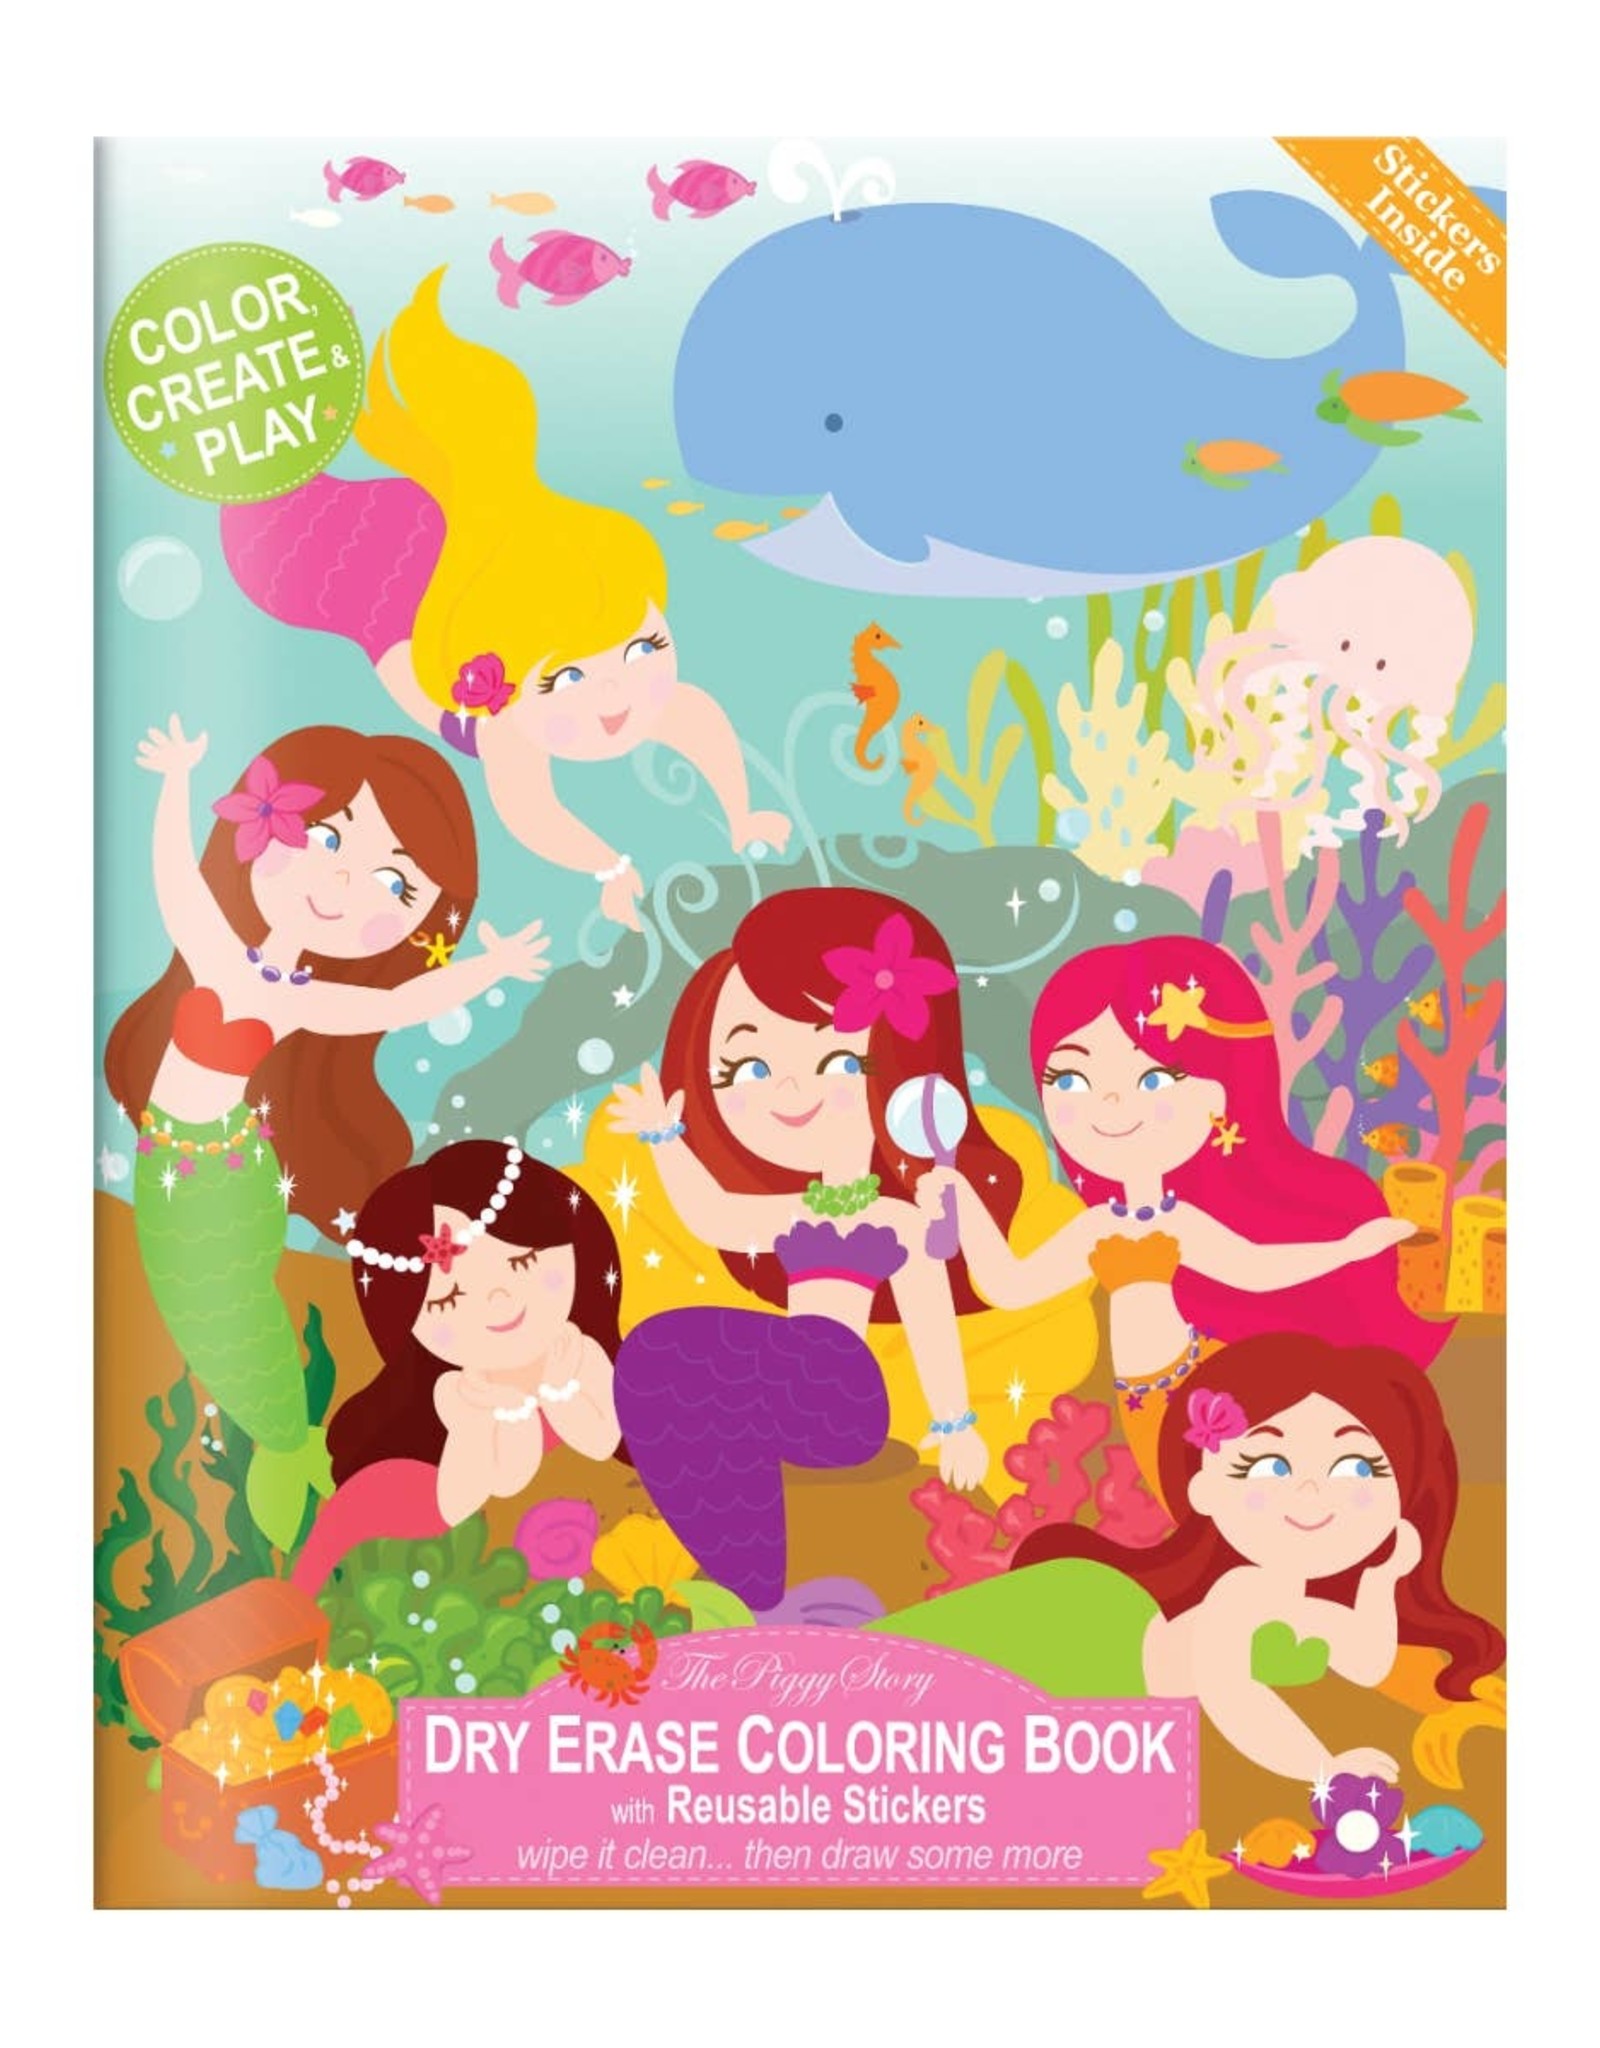 The Piggy Story Magical Mermaids Dry Erase Coloring Book